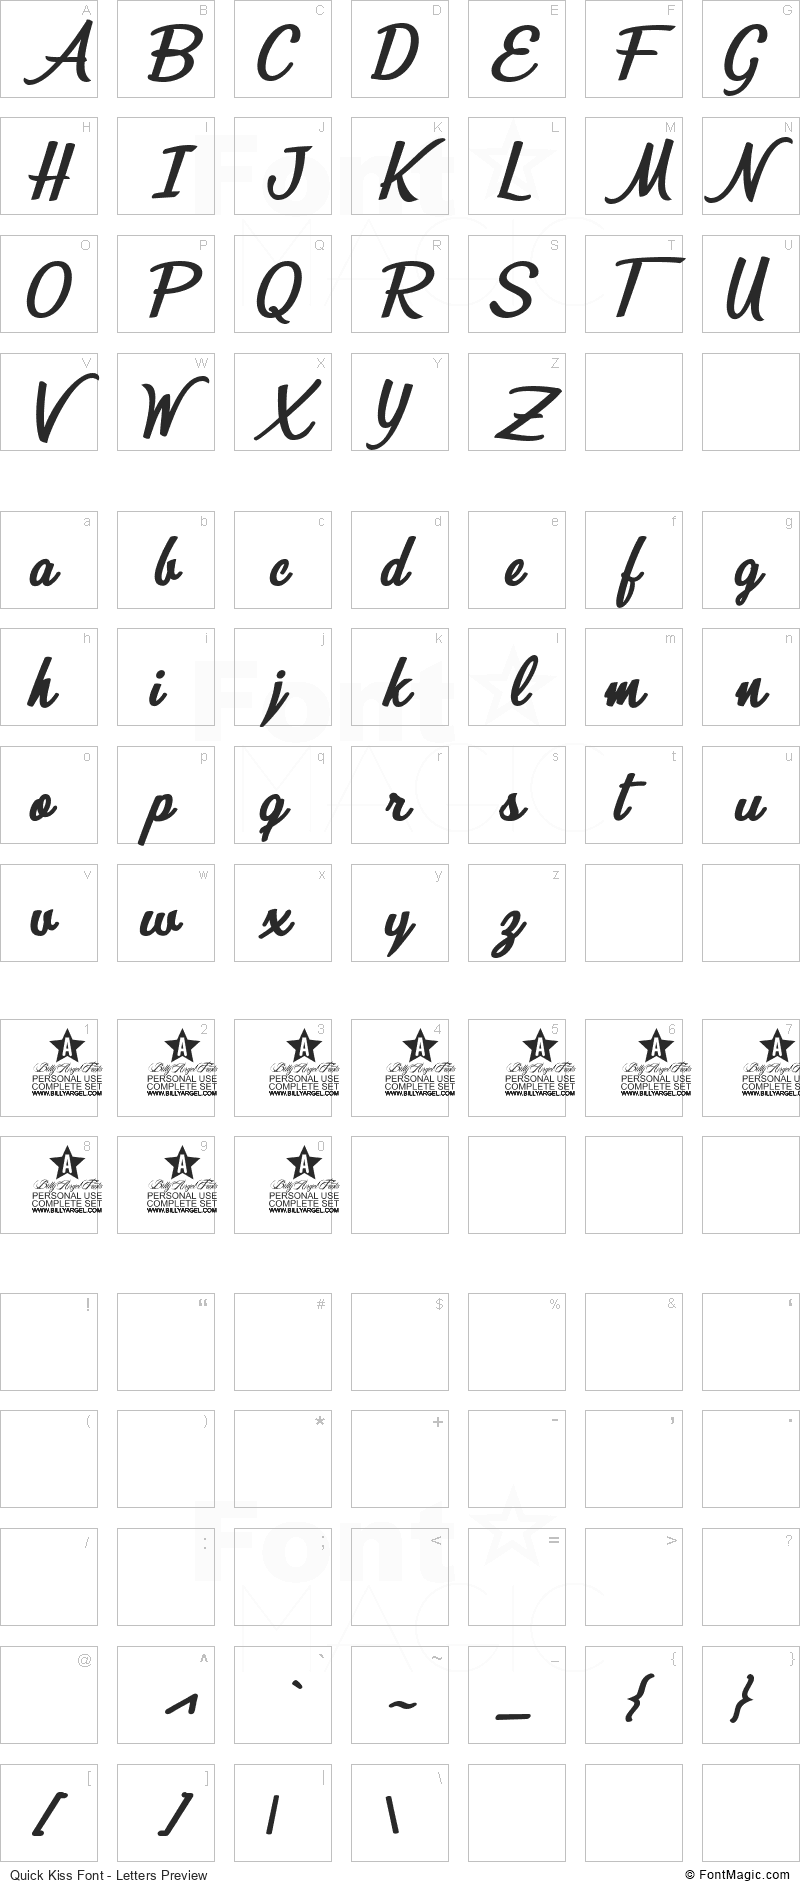 Quick Kiss Font - All Latters Preview Chart